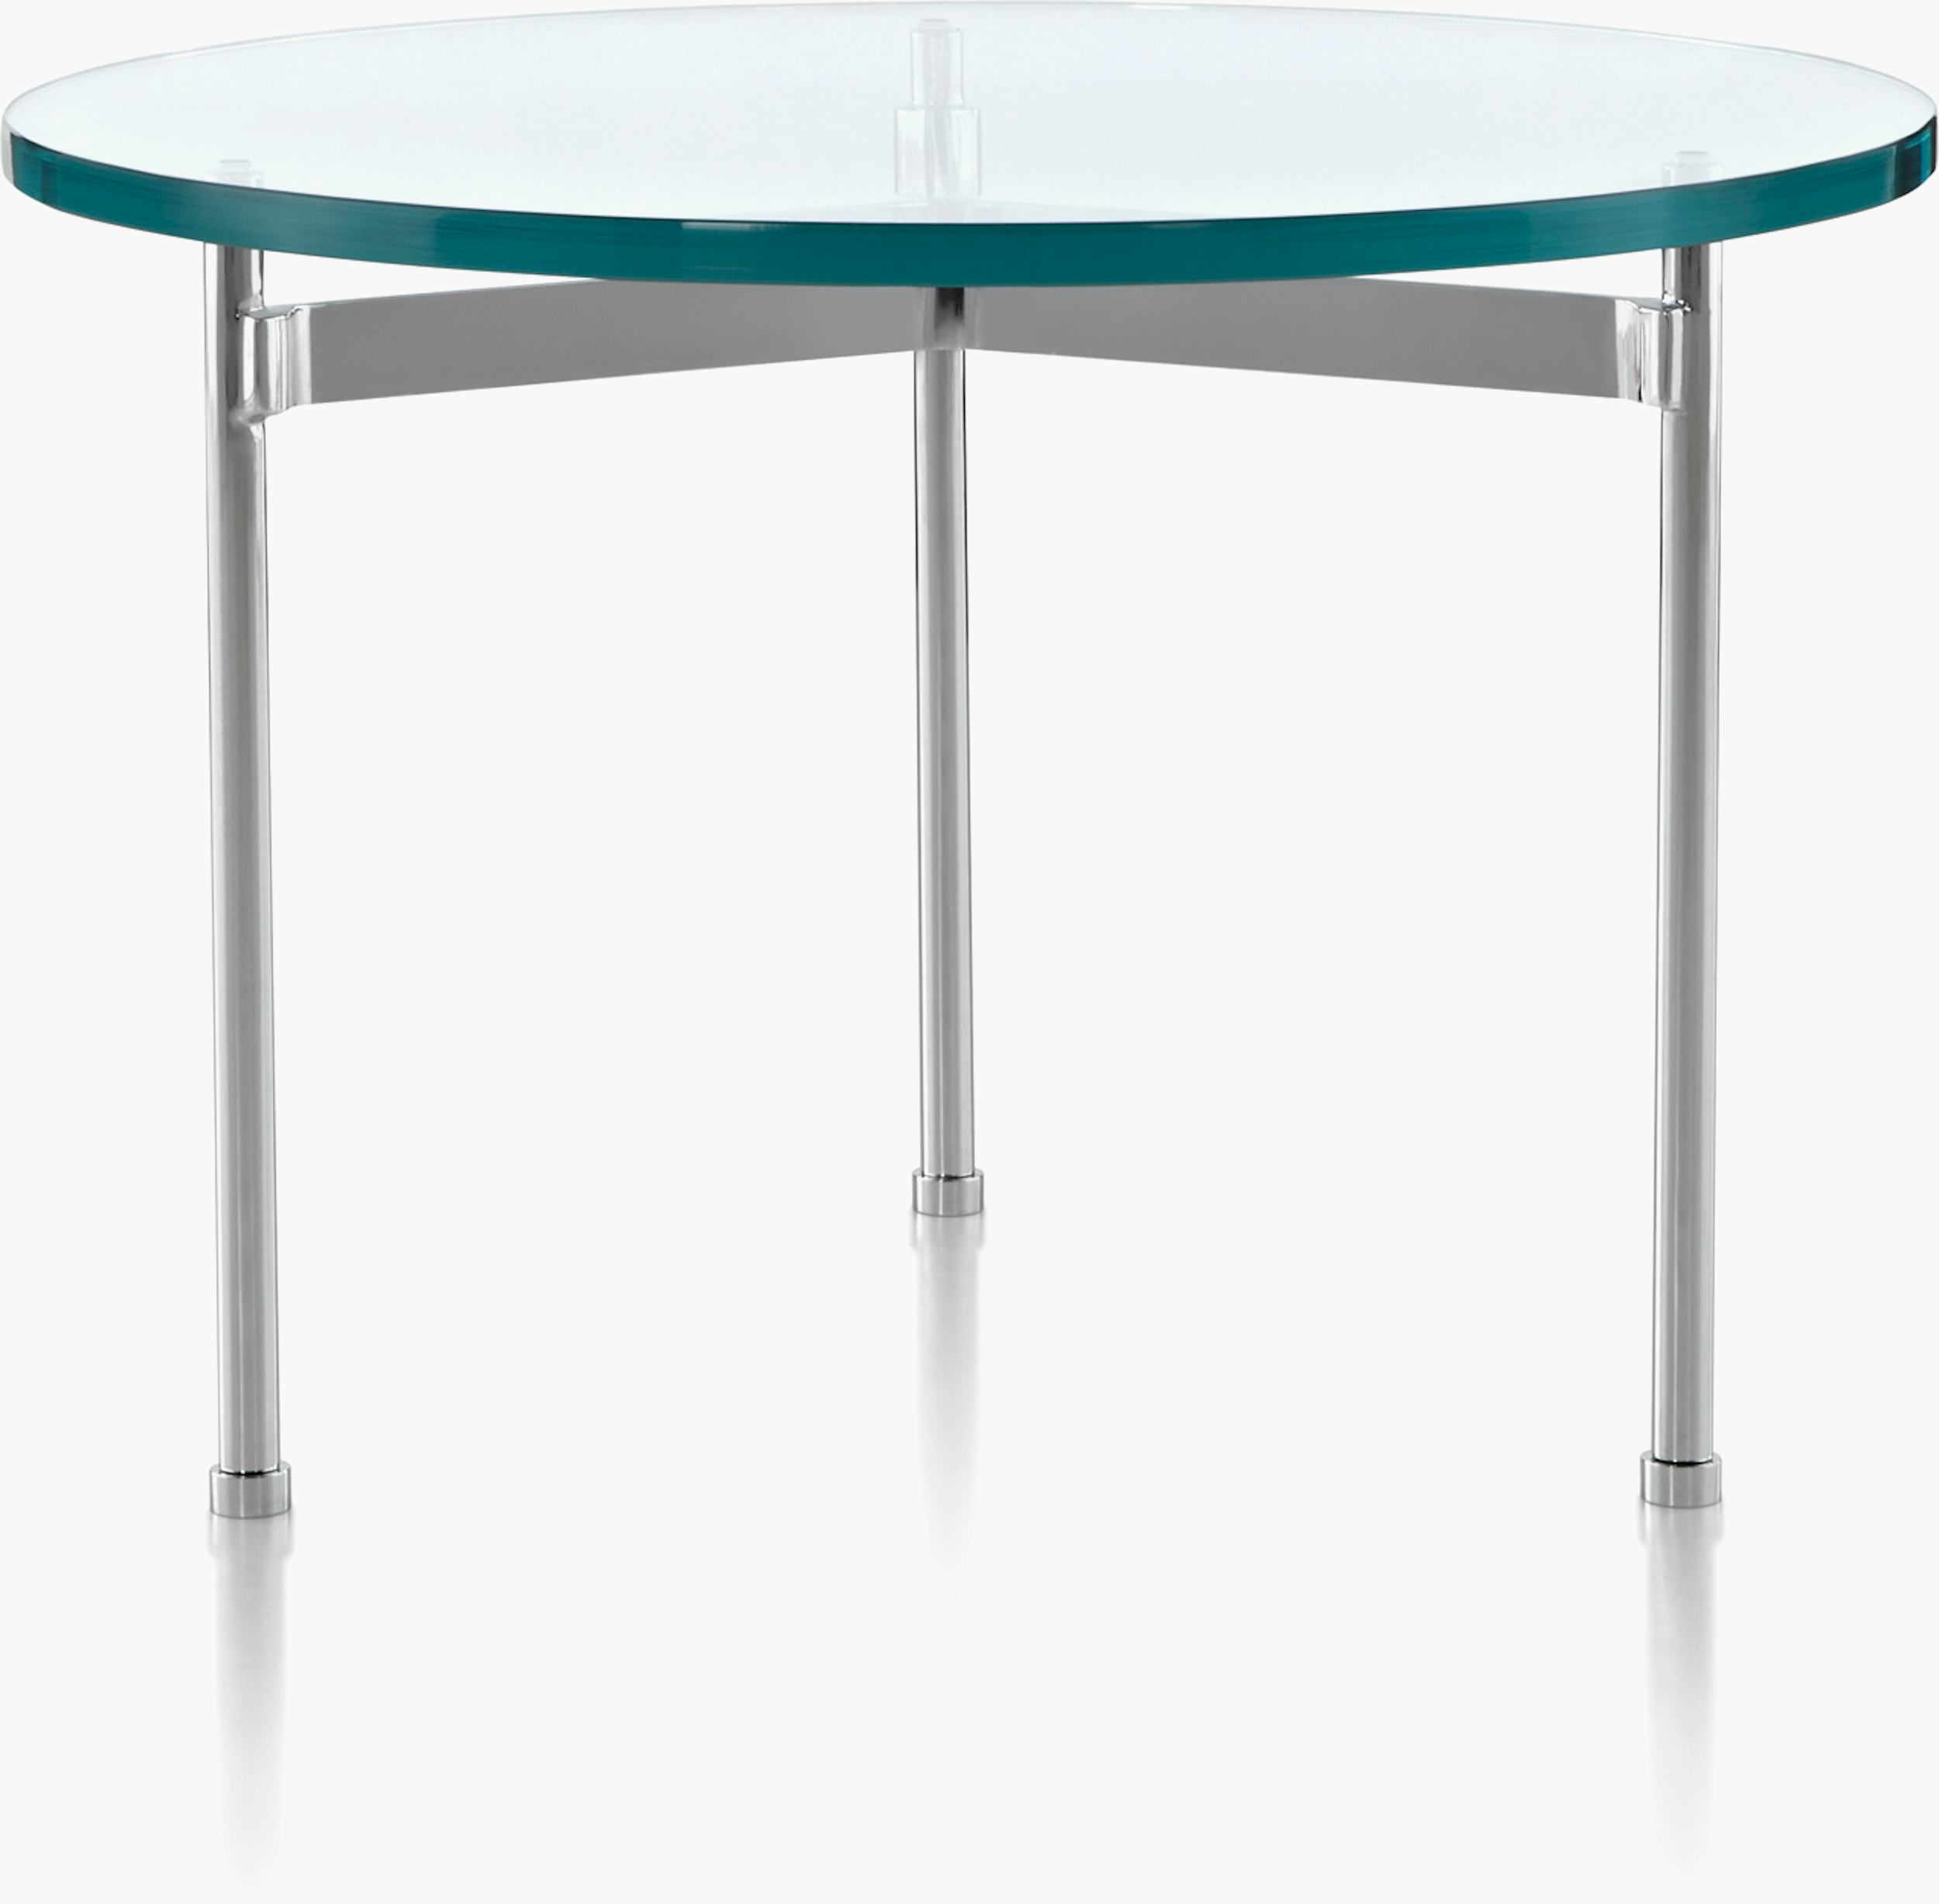 Claw Table Design Within – Reach